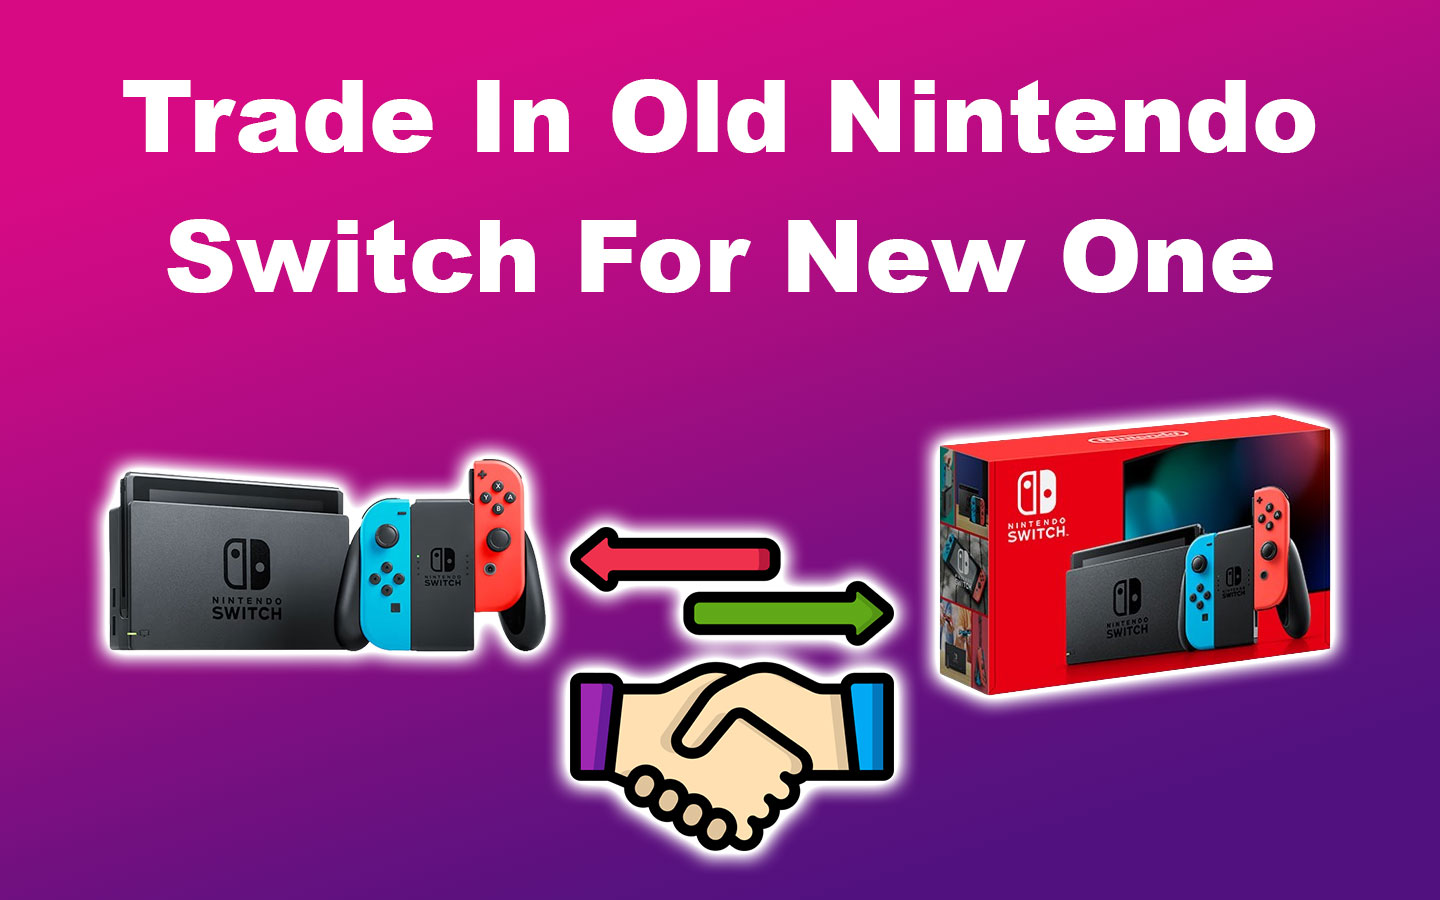 Trade In Old Nintendo Switch For New One